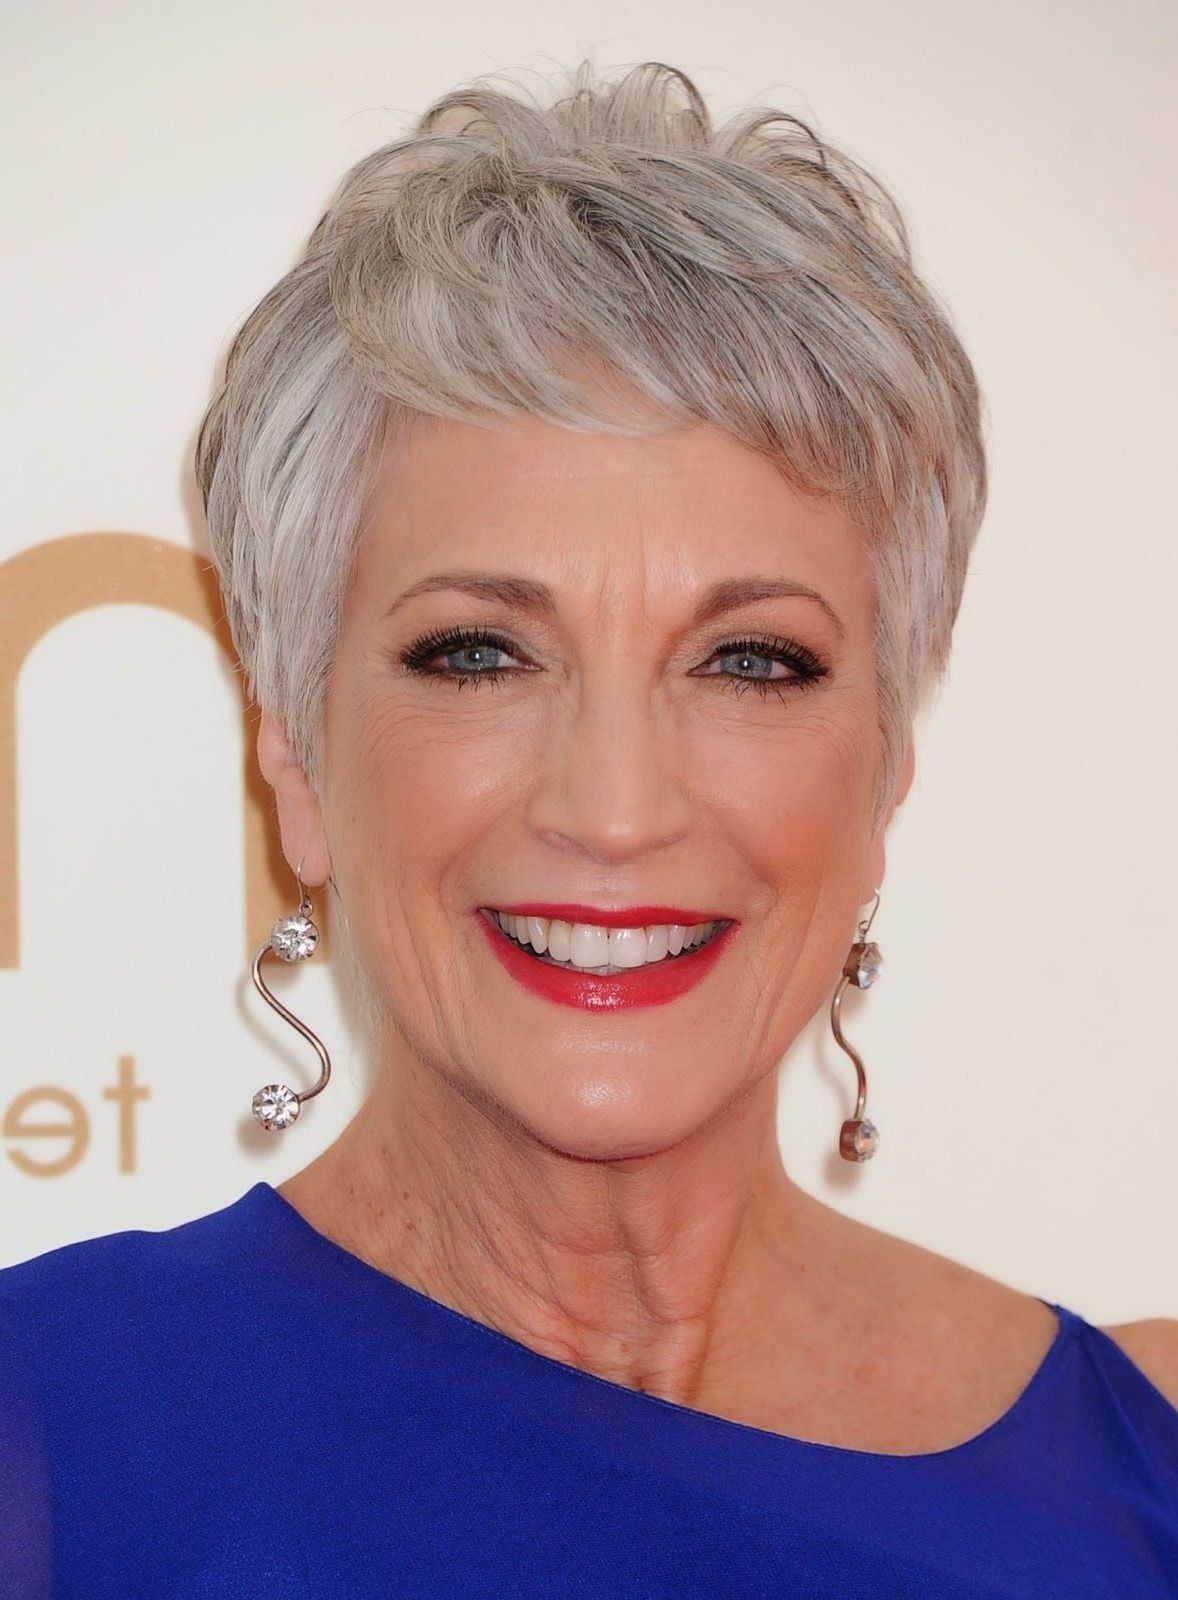 21 Short Haircuts For Women Over 50 | Short Pixie Haircuts, Short For Most Up To Date Short Pixie Hairstyles For Women Over 60 (Photo 4 of 15)